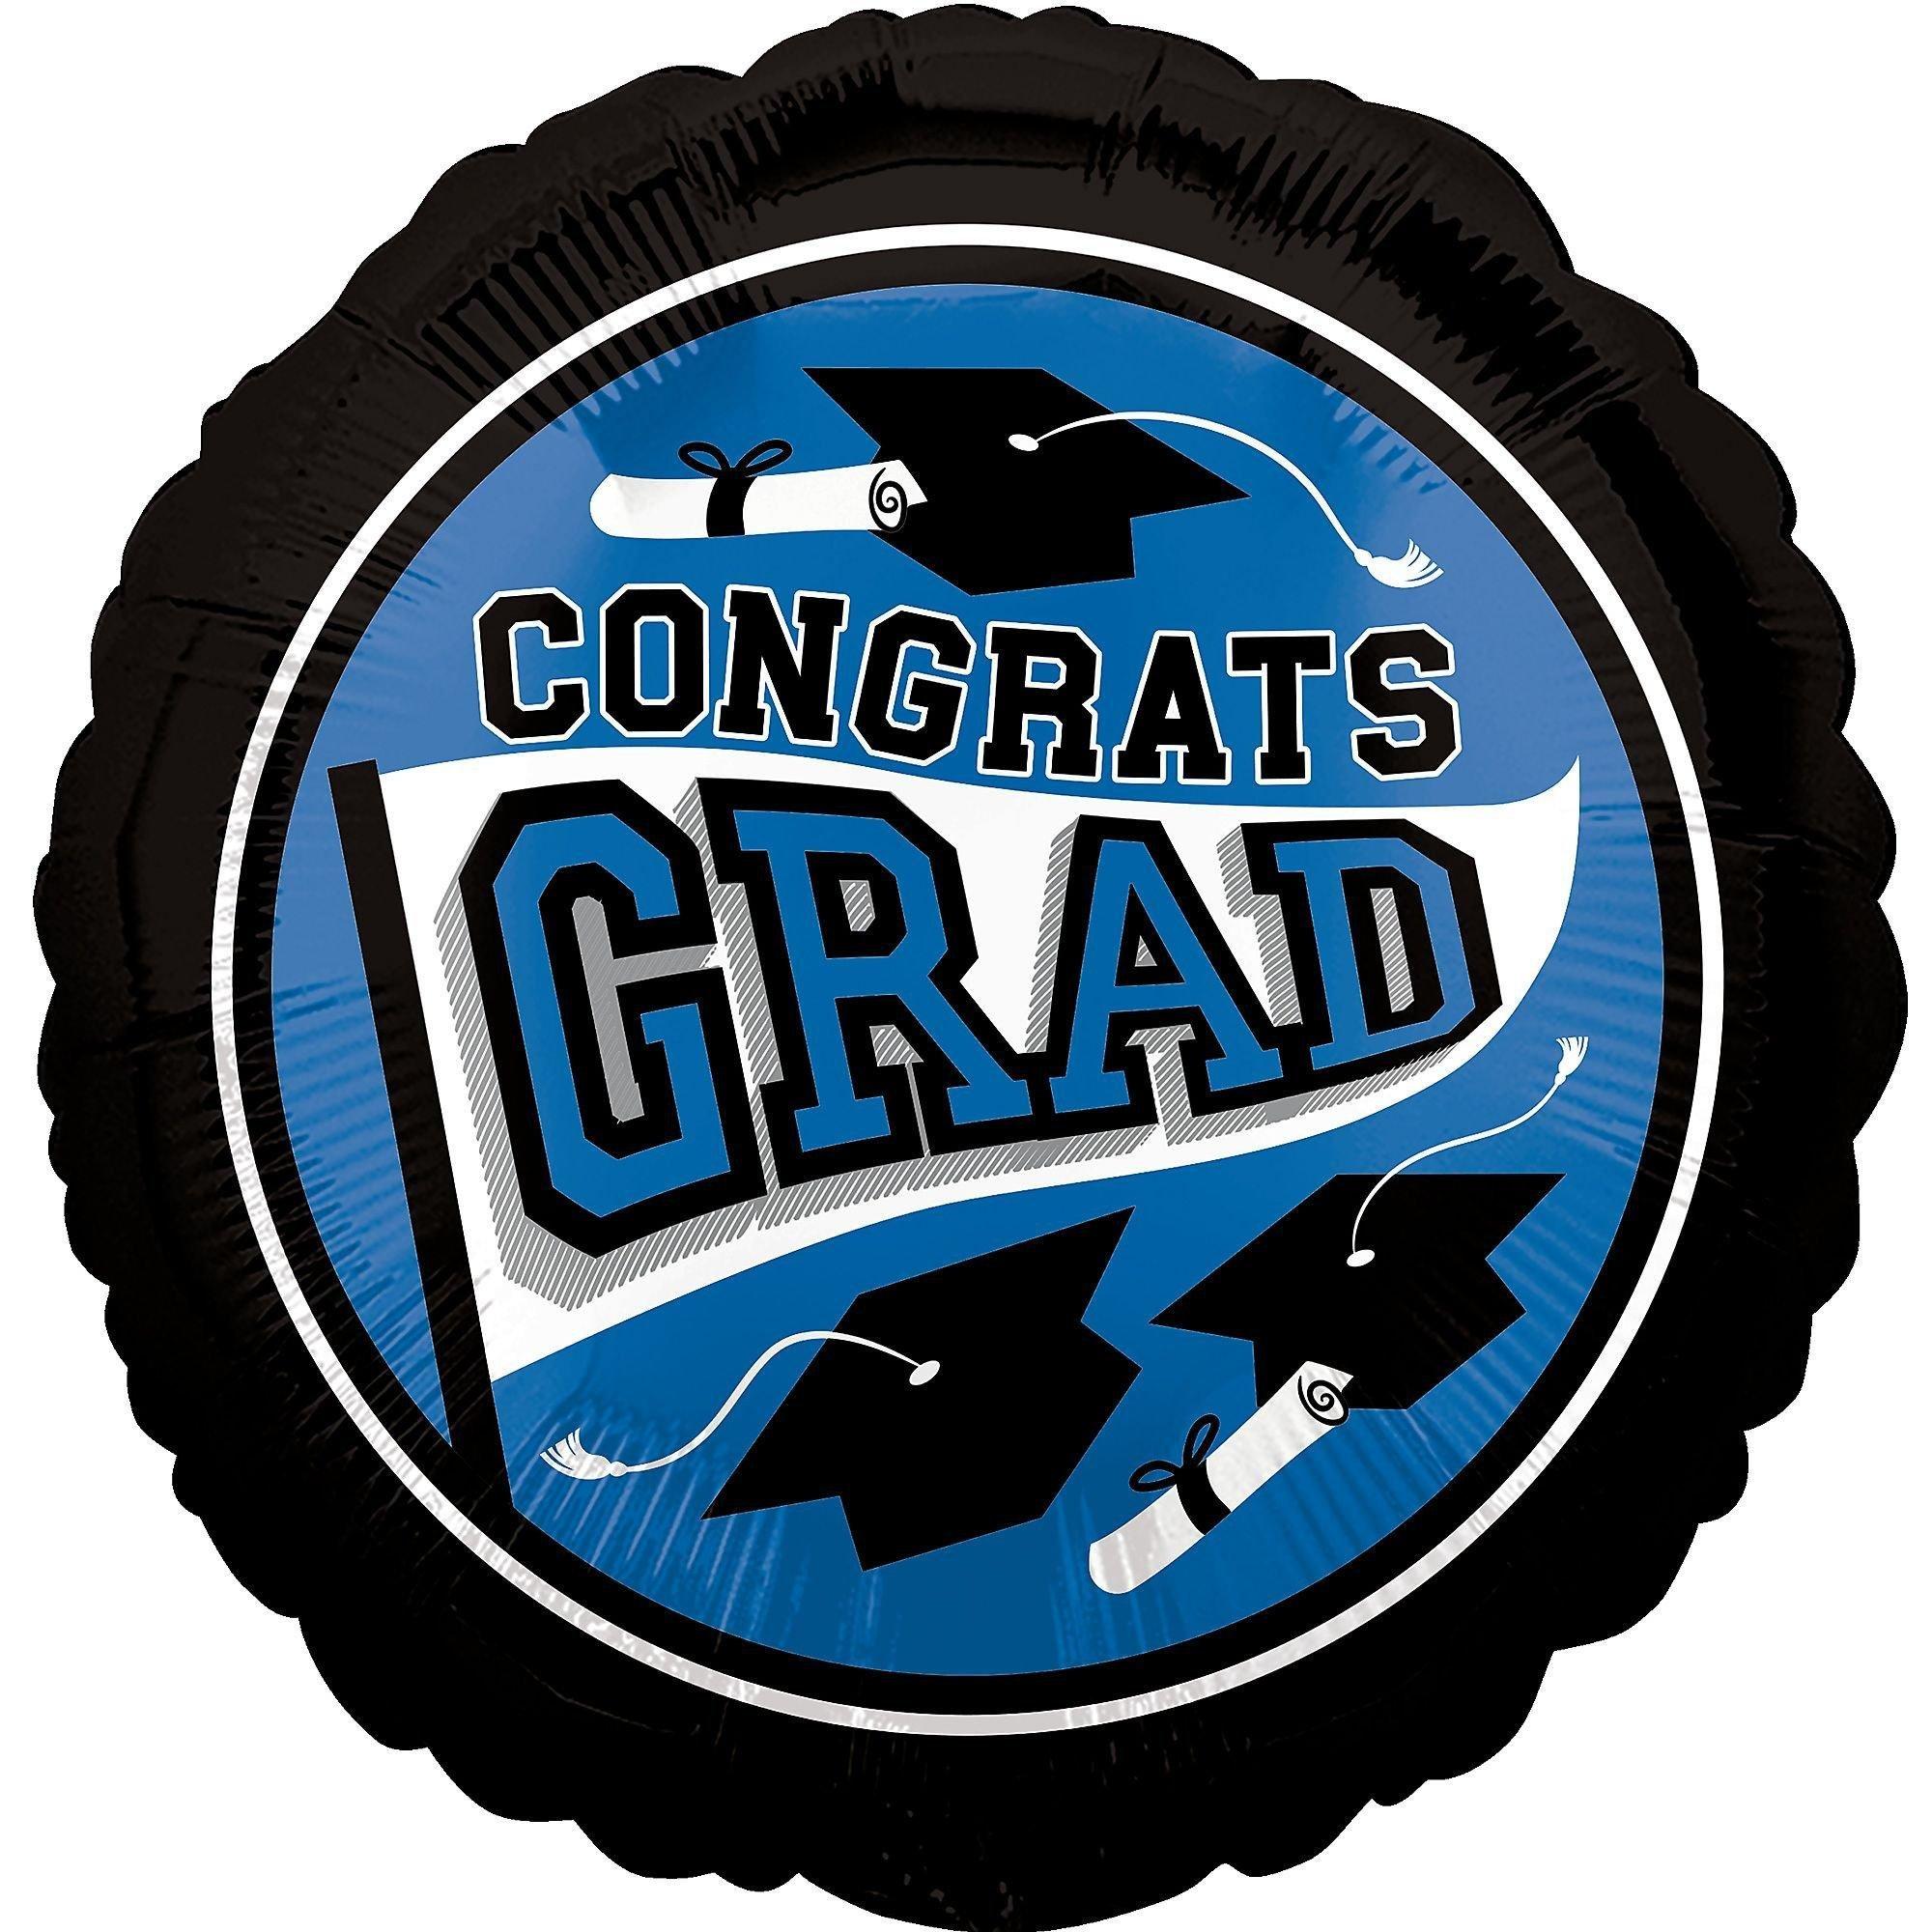 Graduation Party Decorations Kit with Banners, Balloons, Centerpiece, Streamers - Blue 2024 Congrats Grad